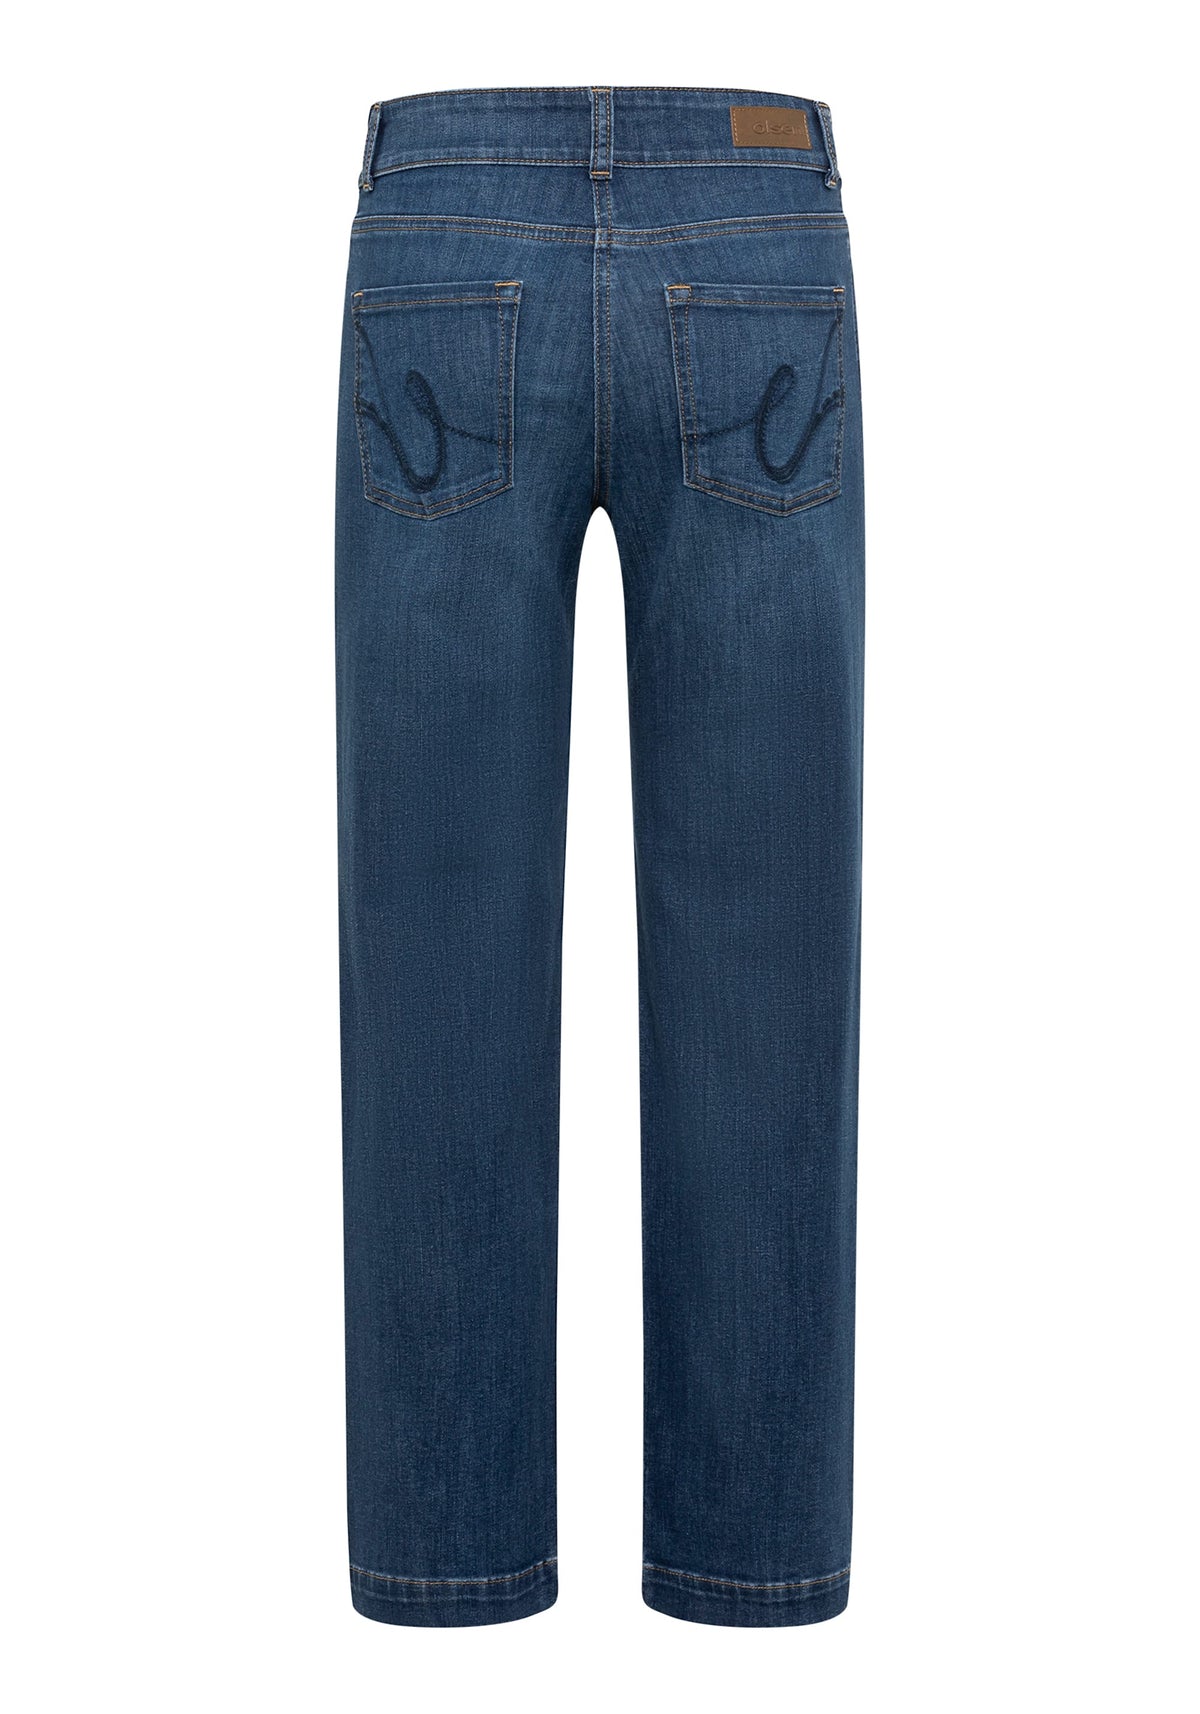 Mona Fit Straight Leg 5-Pocket Jean containing REPREVE®